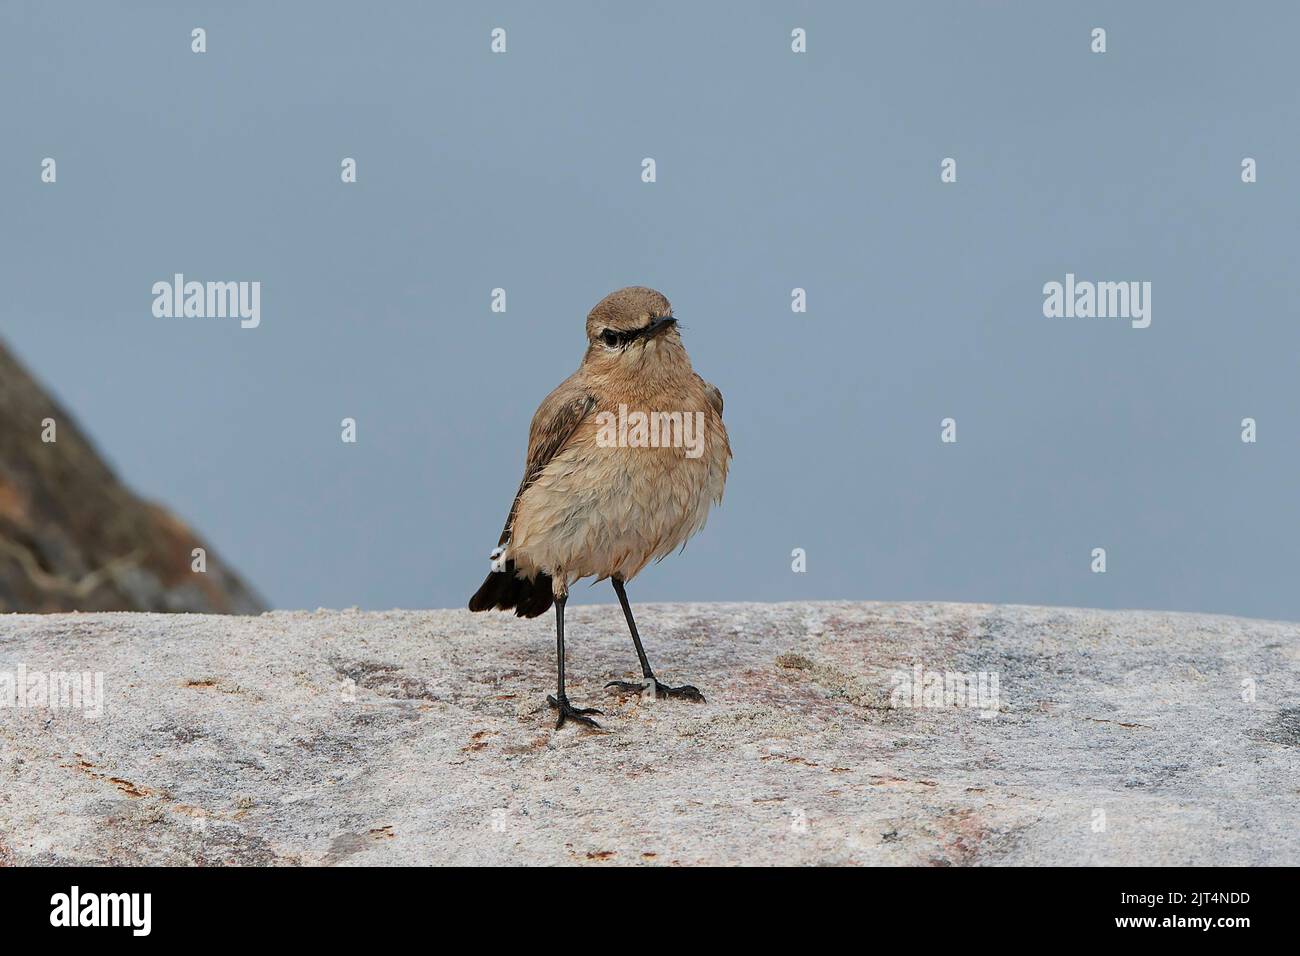 Isabelline wheatear in its natural habitat at the beach Stock Photo